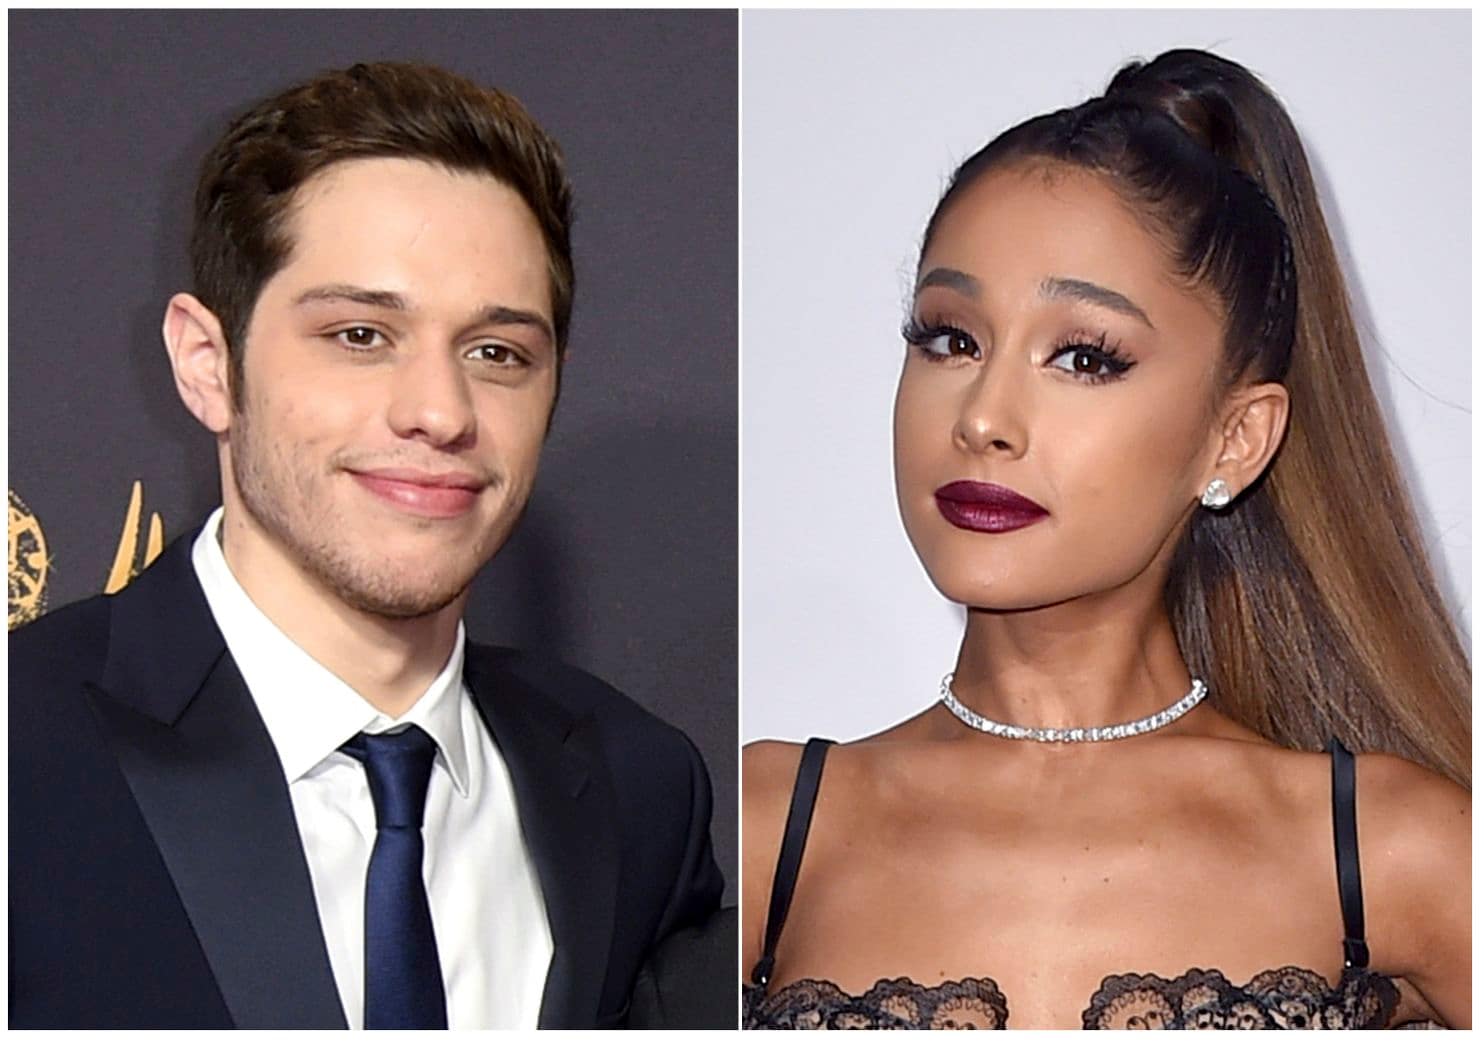 Pete Davidson wishes Ariana Grande the best on SNL while she releases song thanking him